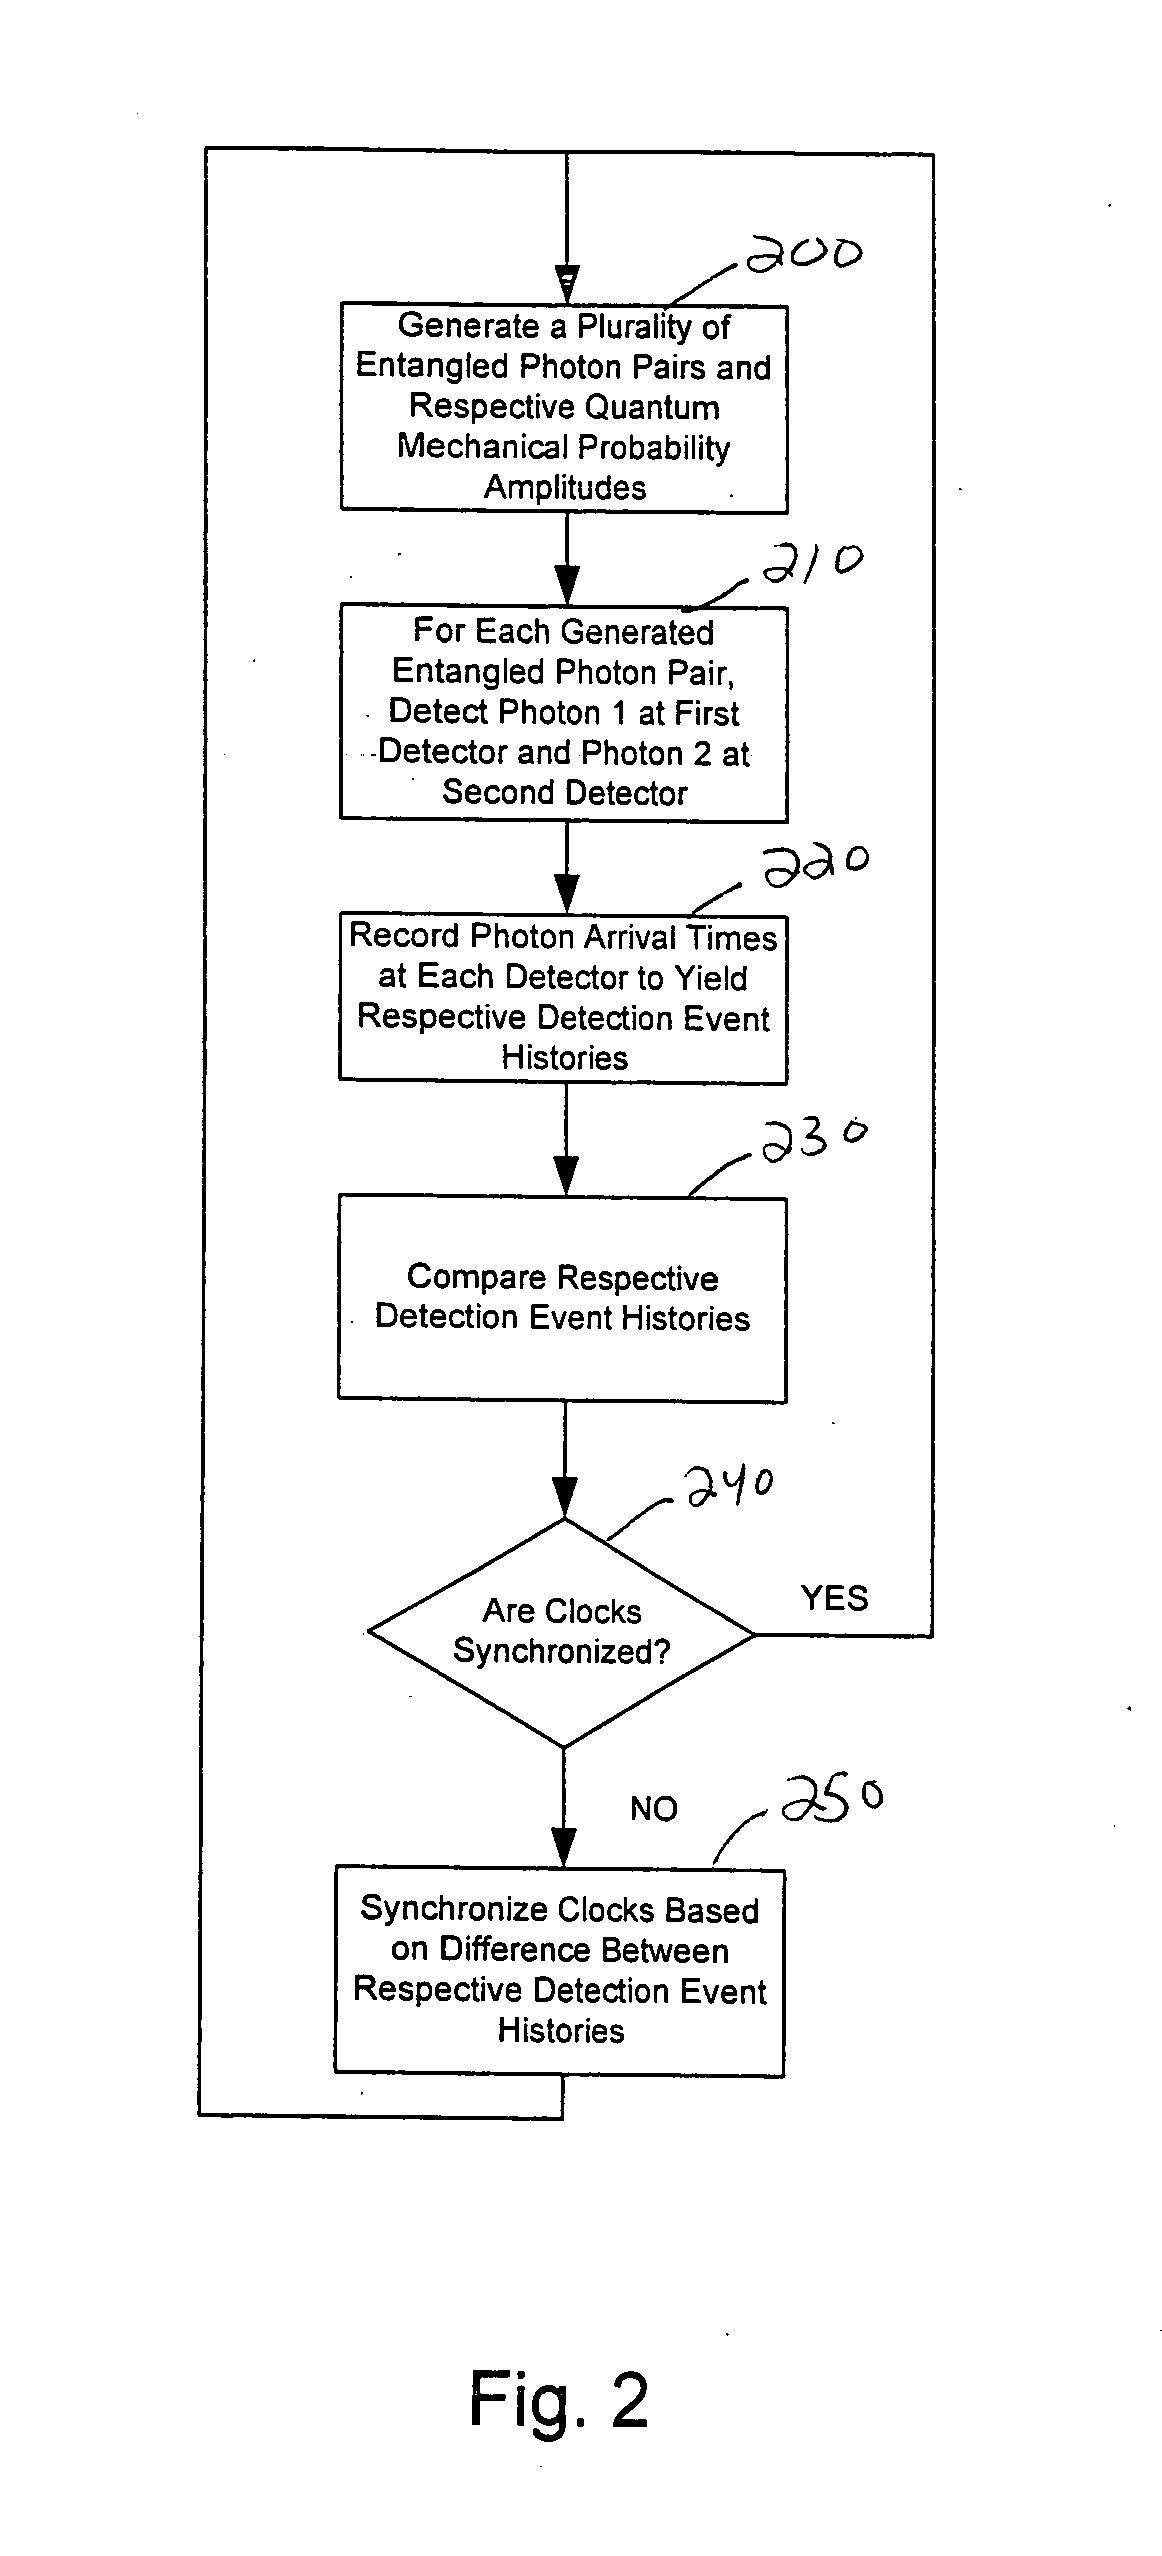 System and method for clock synchronization and position determination using entangled photon pairs